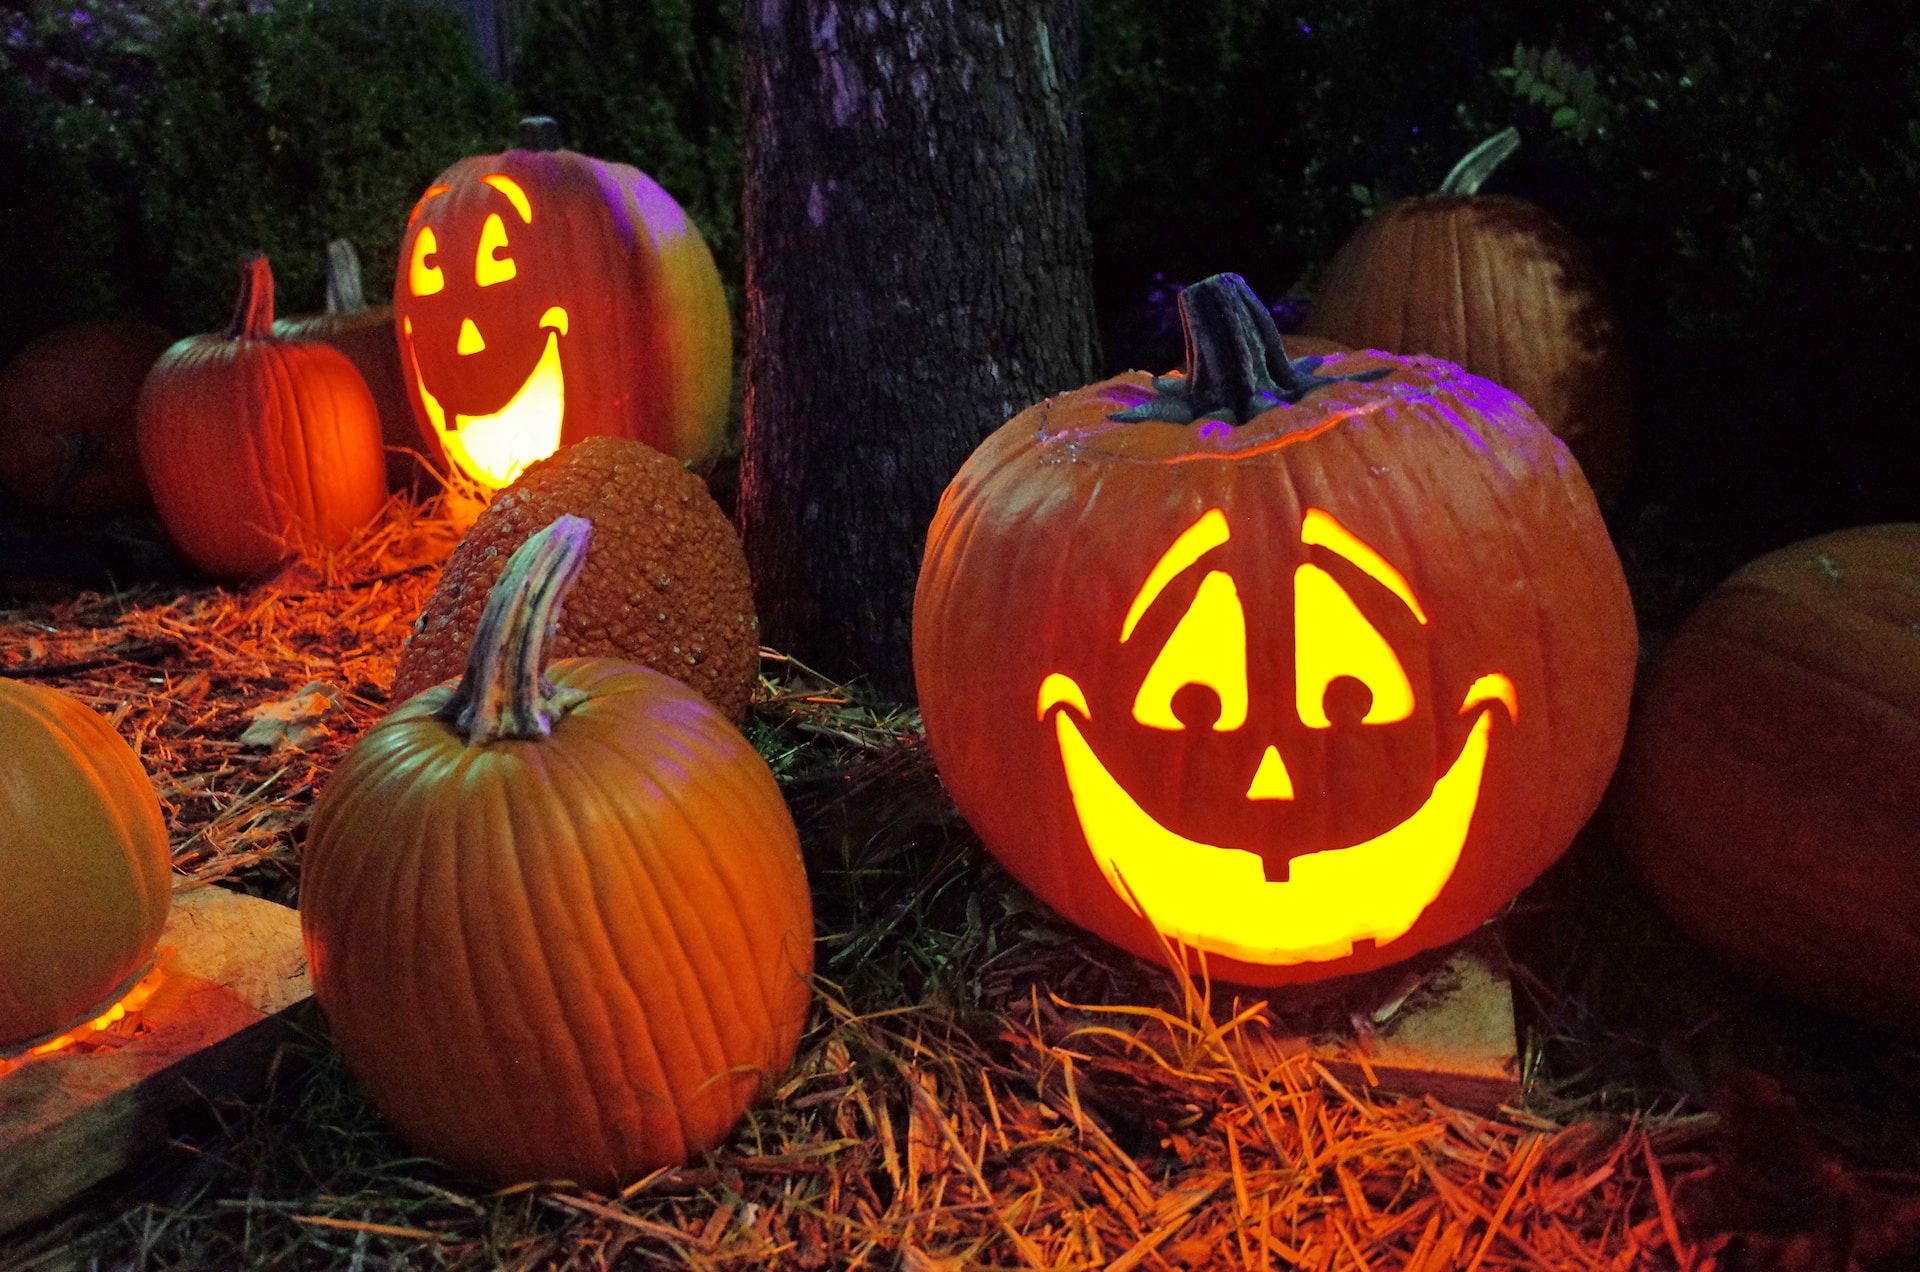 Decorated pumpkins outside during the Autumn season